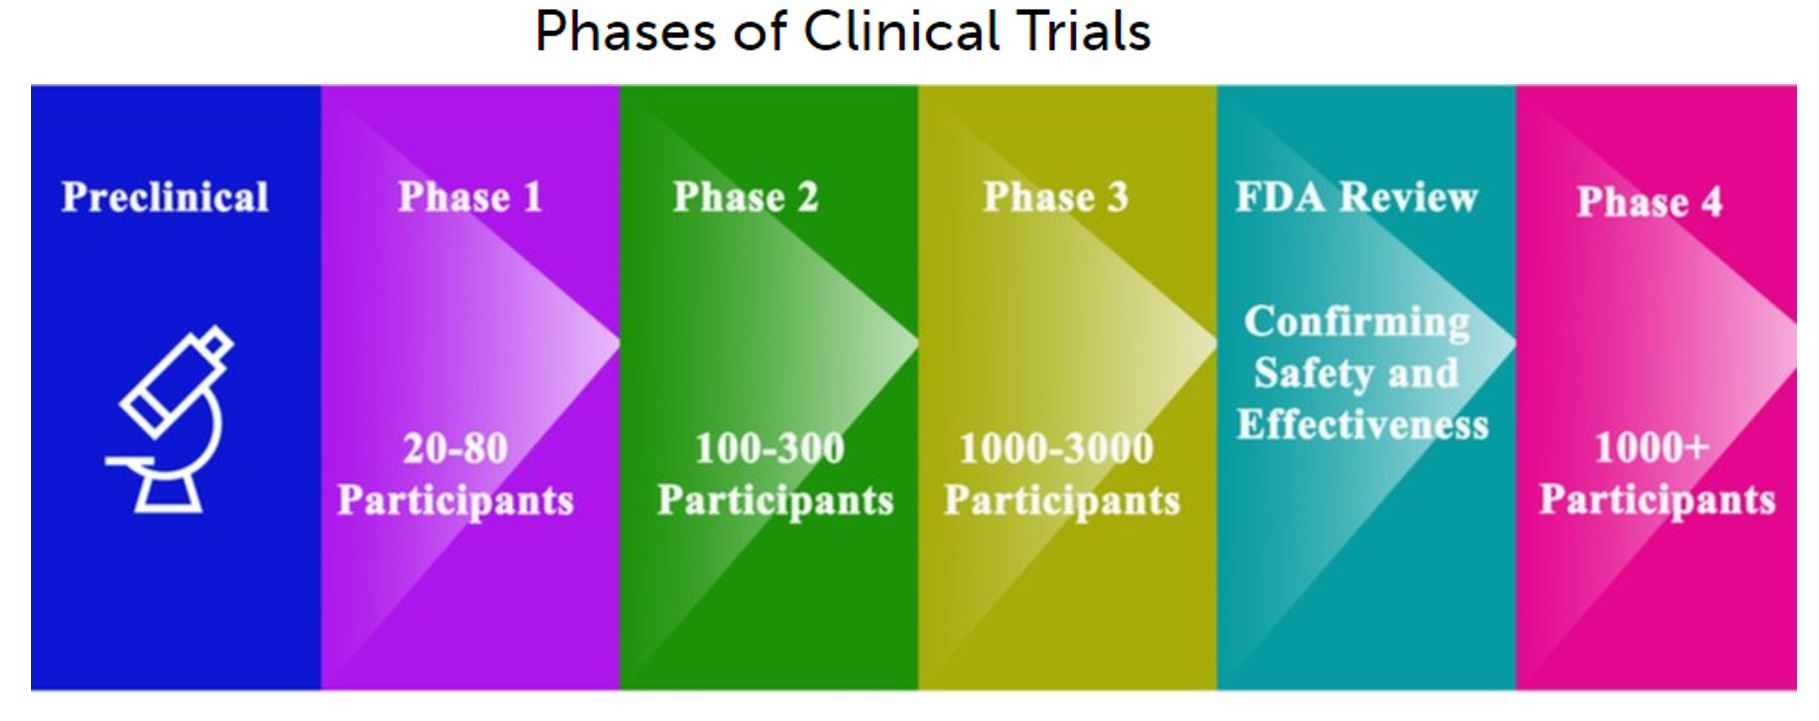 Image showing 6 phases of clinical trials